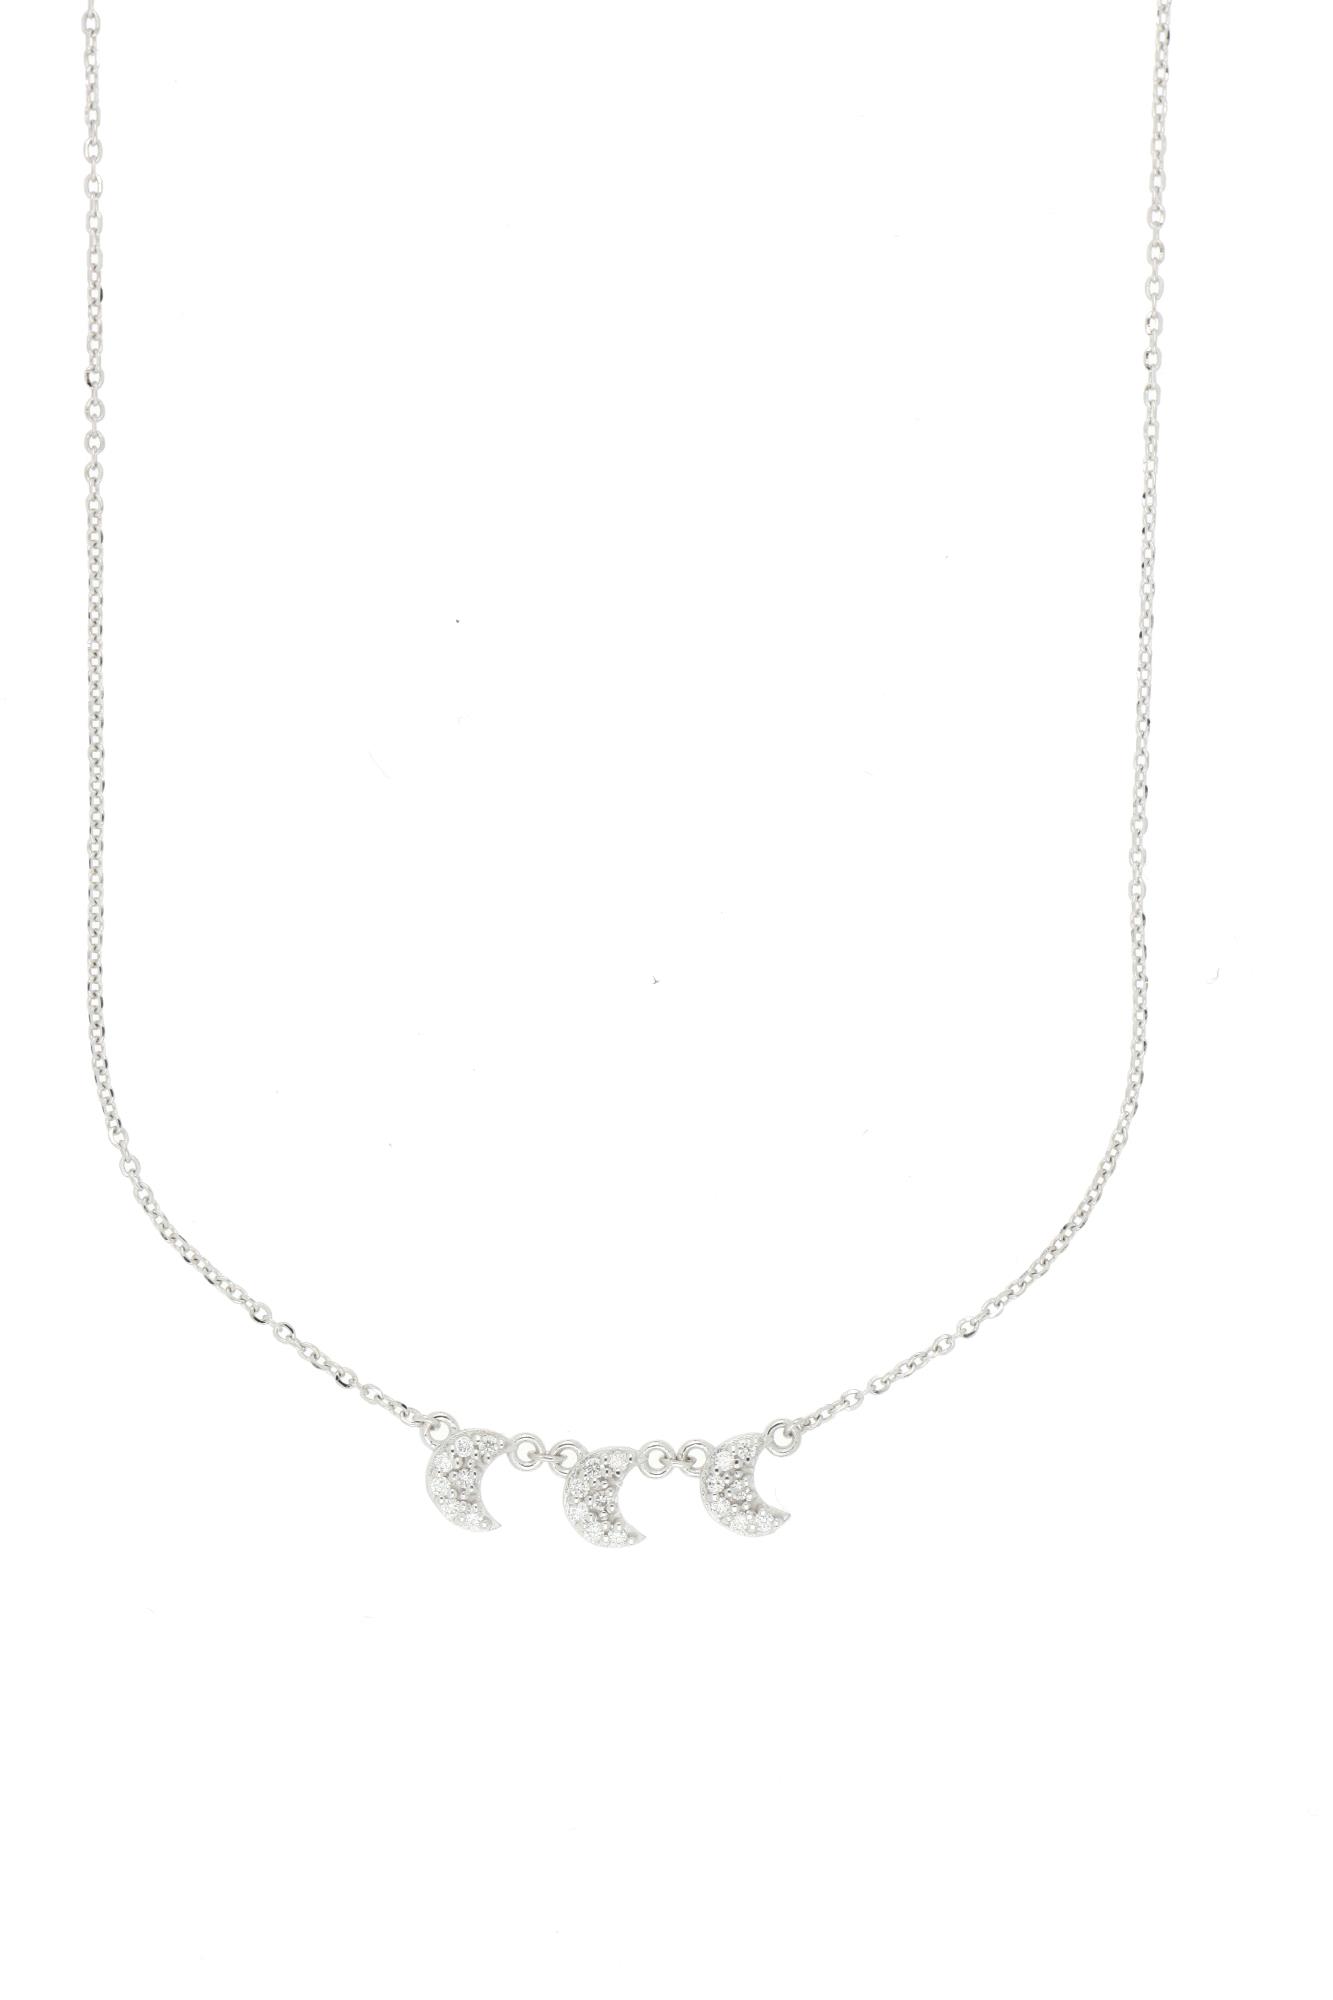 Necklace white gold with diamonds - GOLD ART